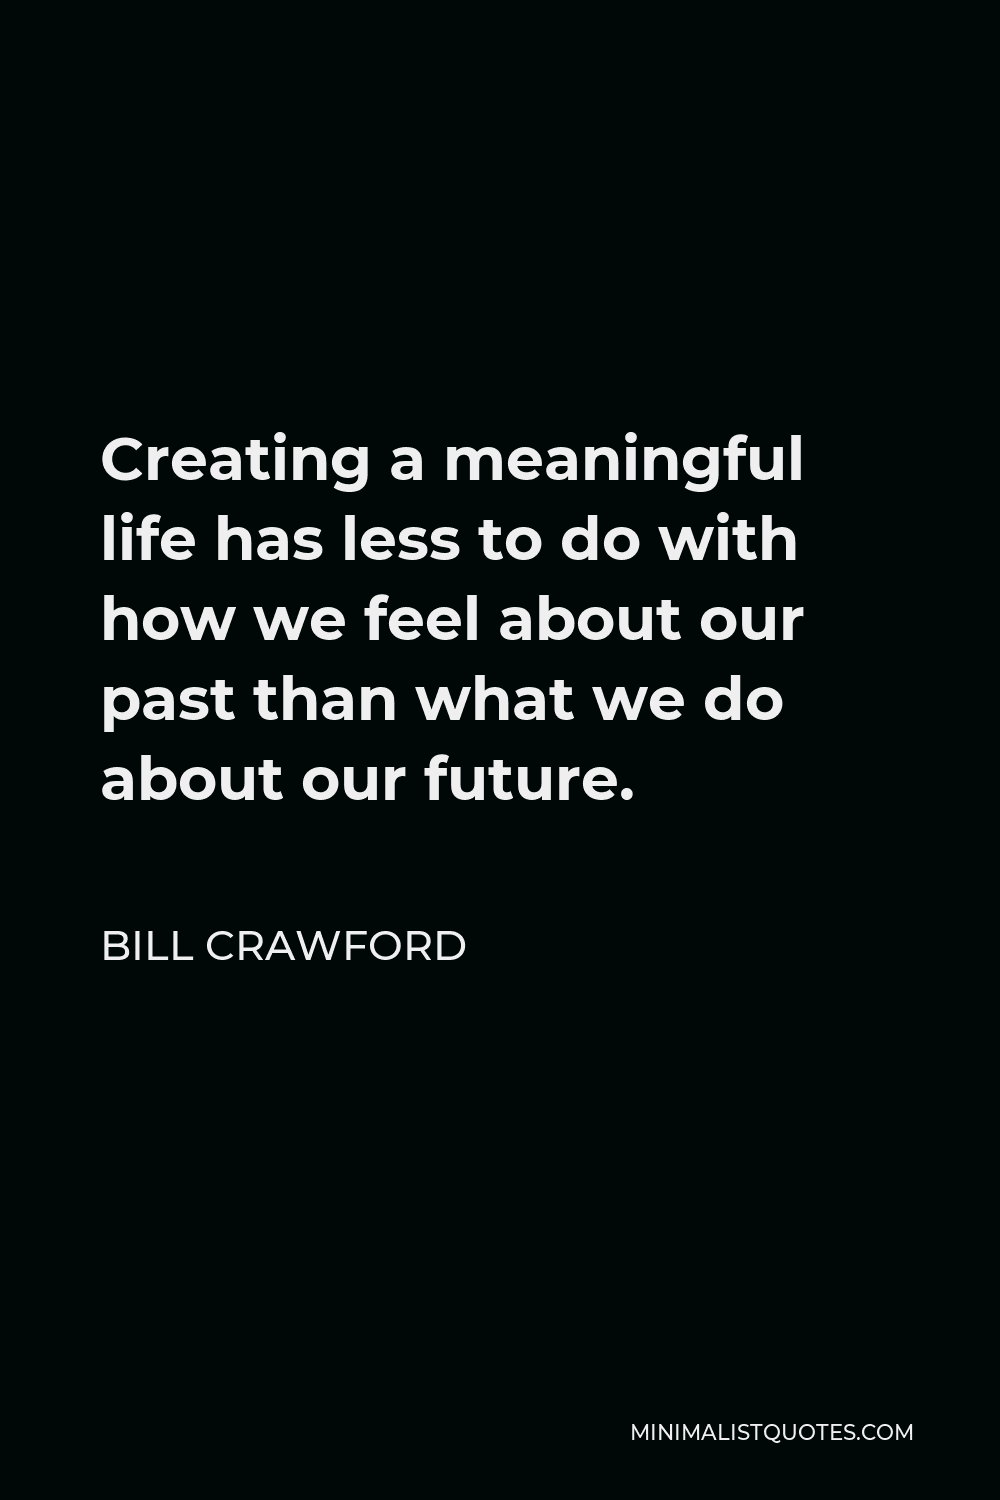 Bill Crawford Quote - Creating a meaningful life has less to do with how we feel about our past than what we do about our future.